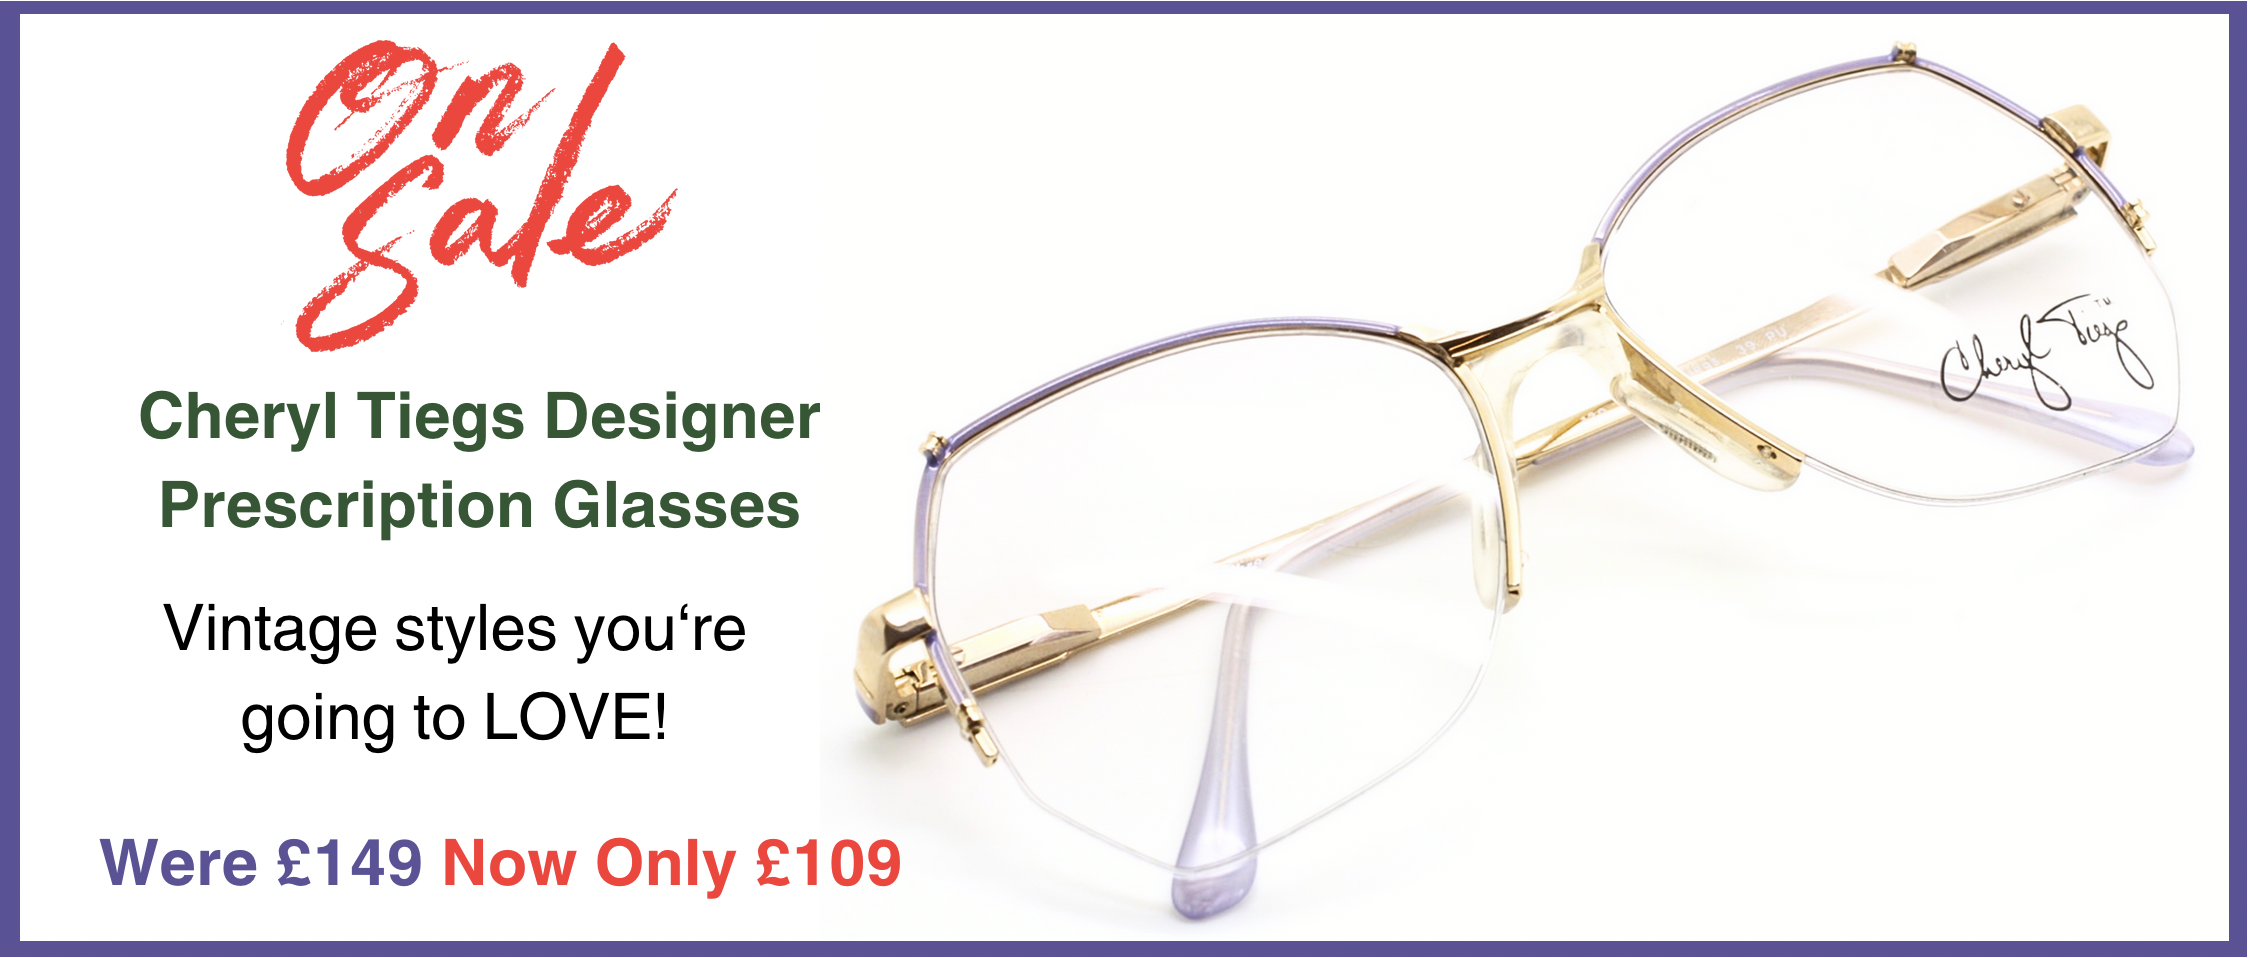 Cheryl Tiegs designer glasses, new and unworn, now on sale at Eyehuggers only £109